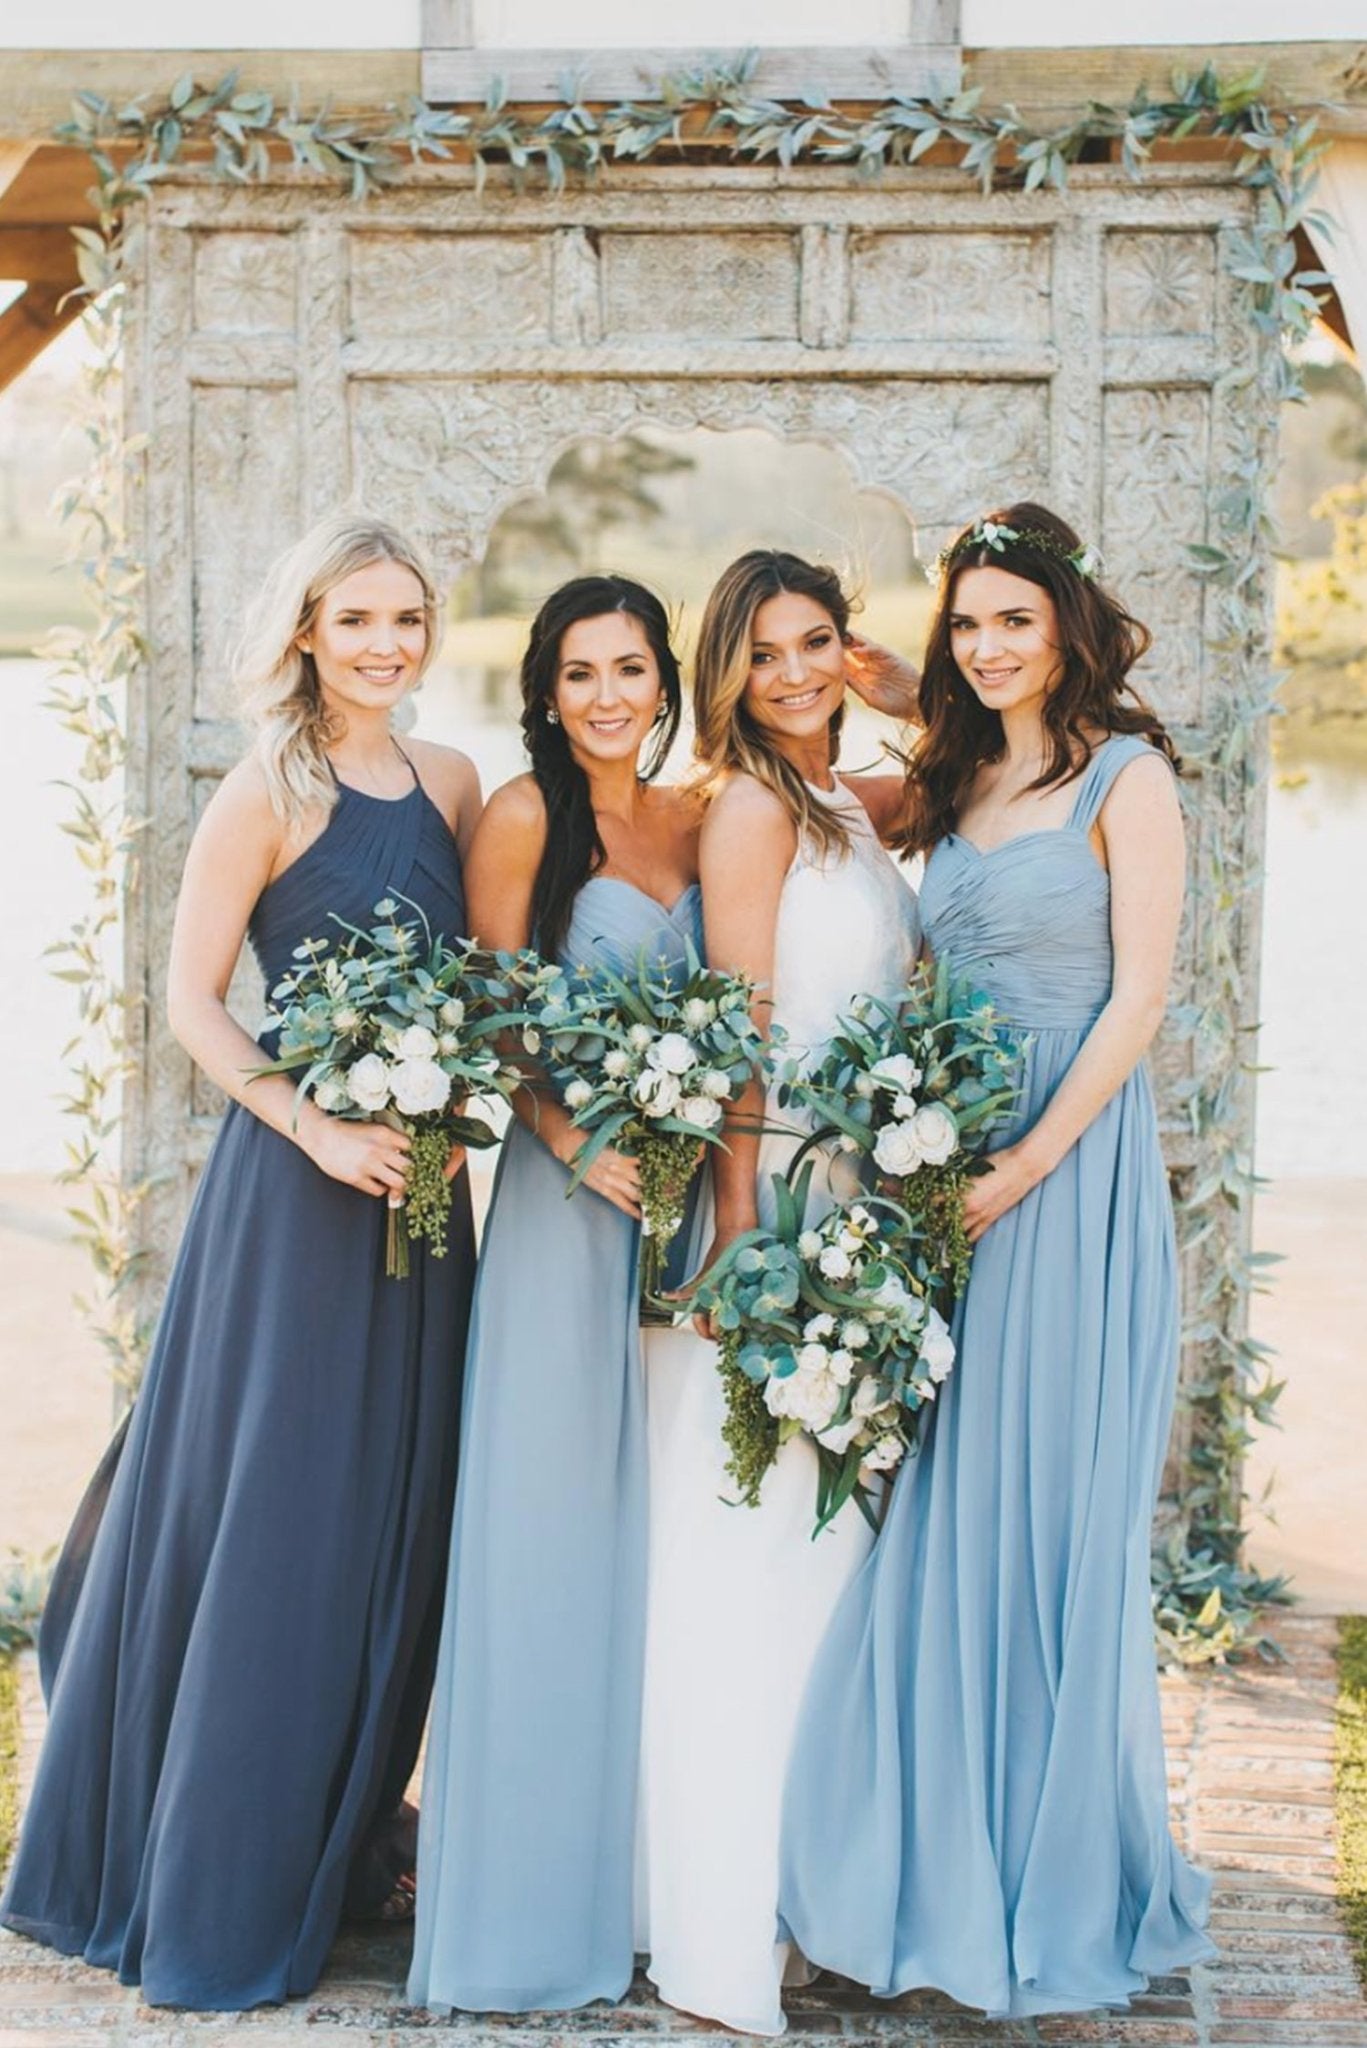 How to Mix and Match Your Bridesmaid Dresses - Pretty Collected